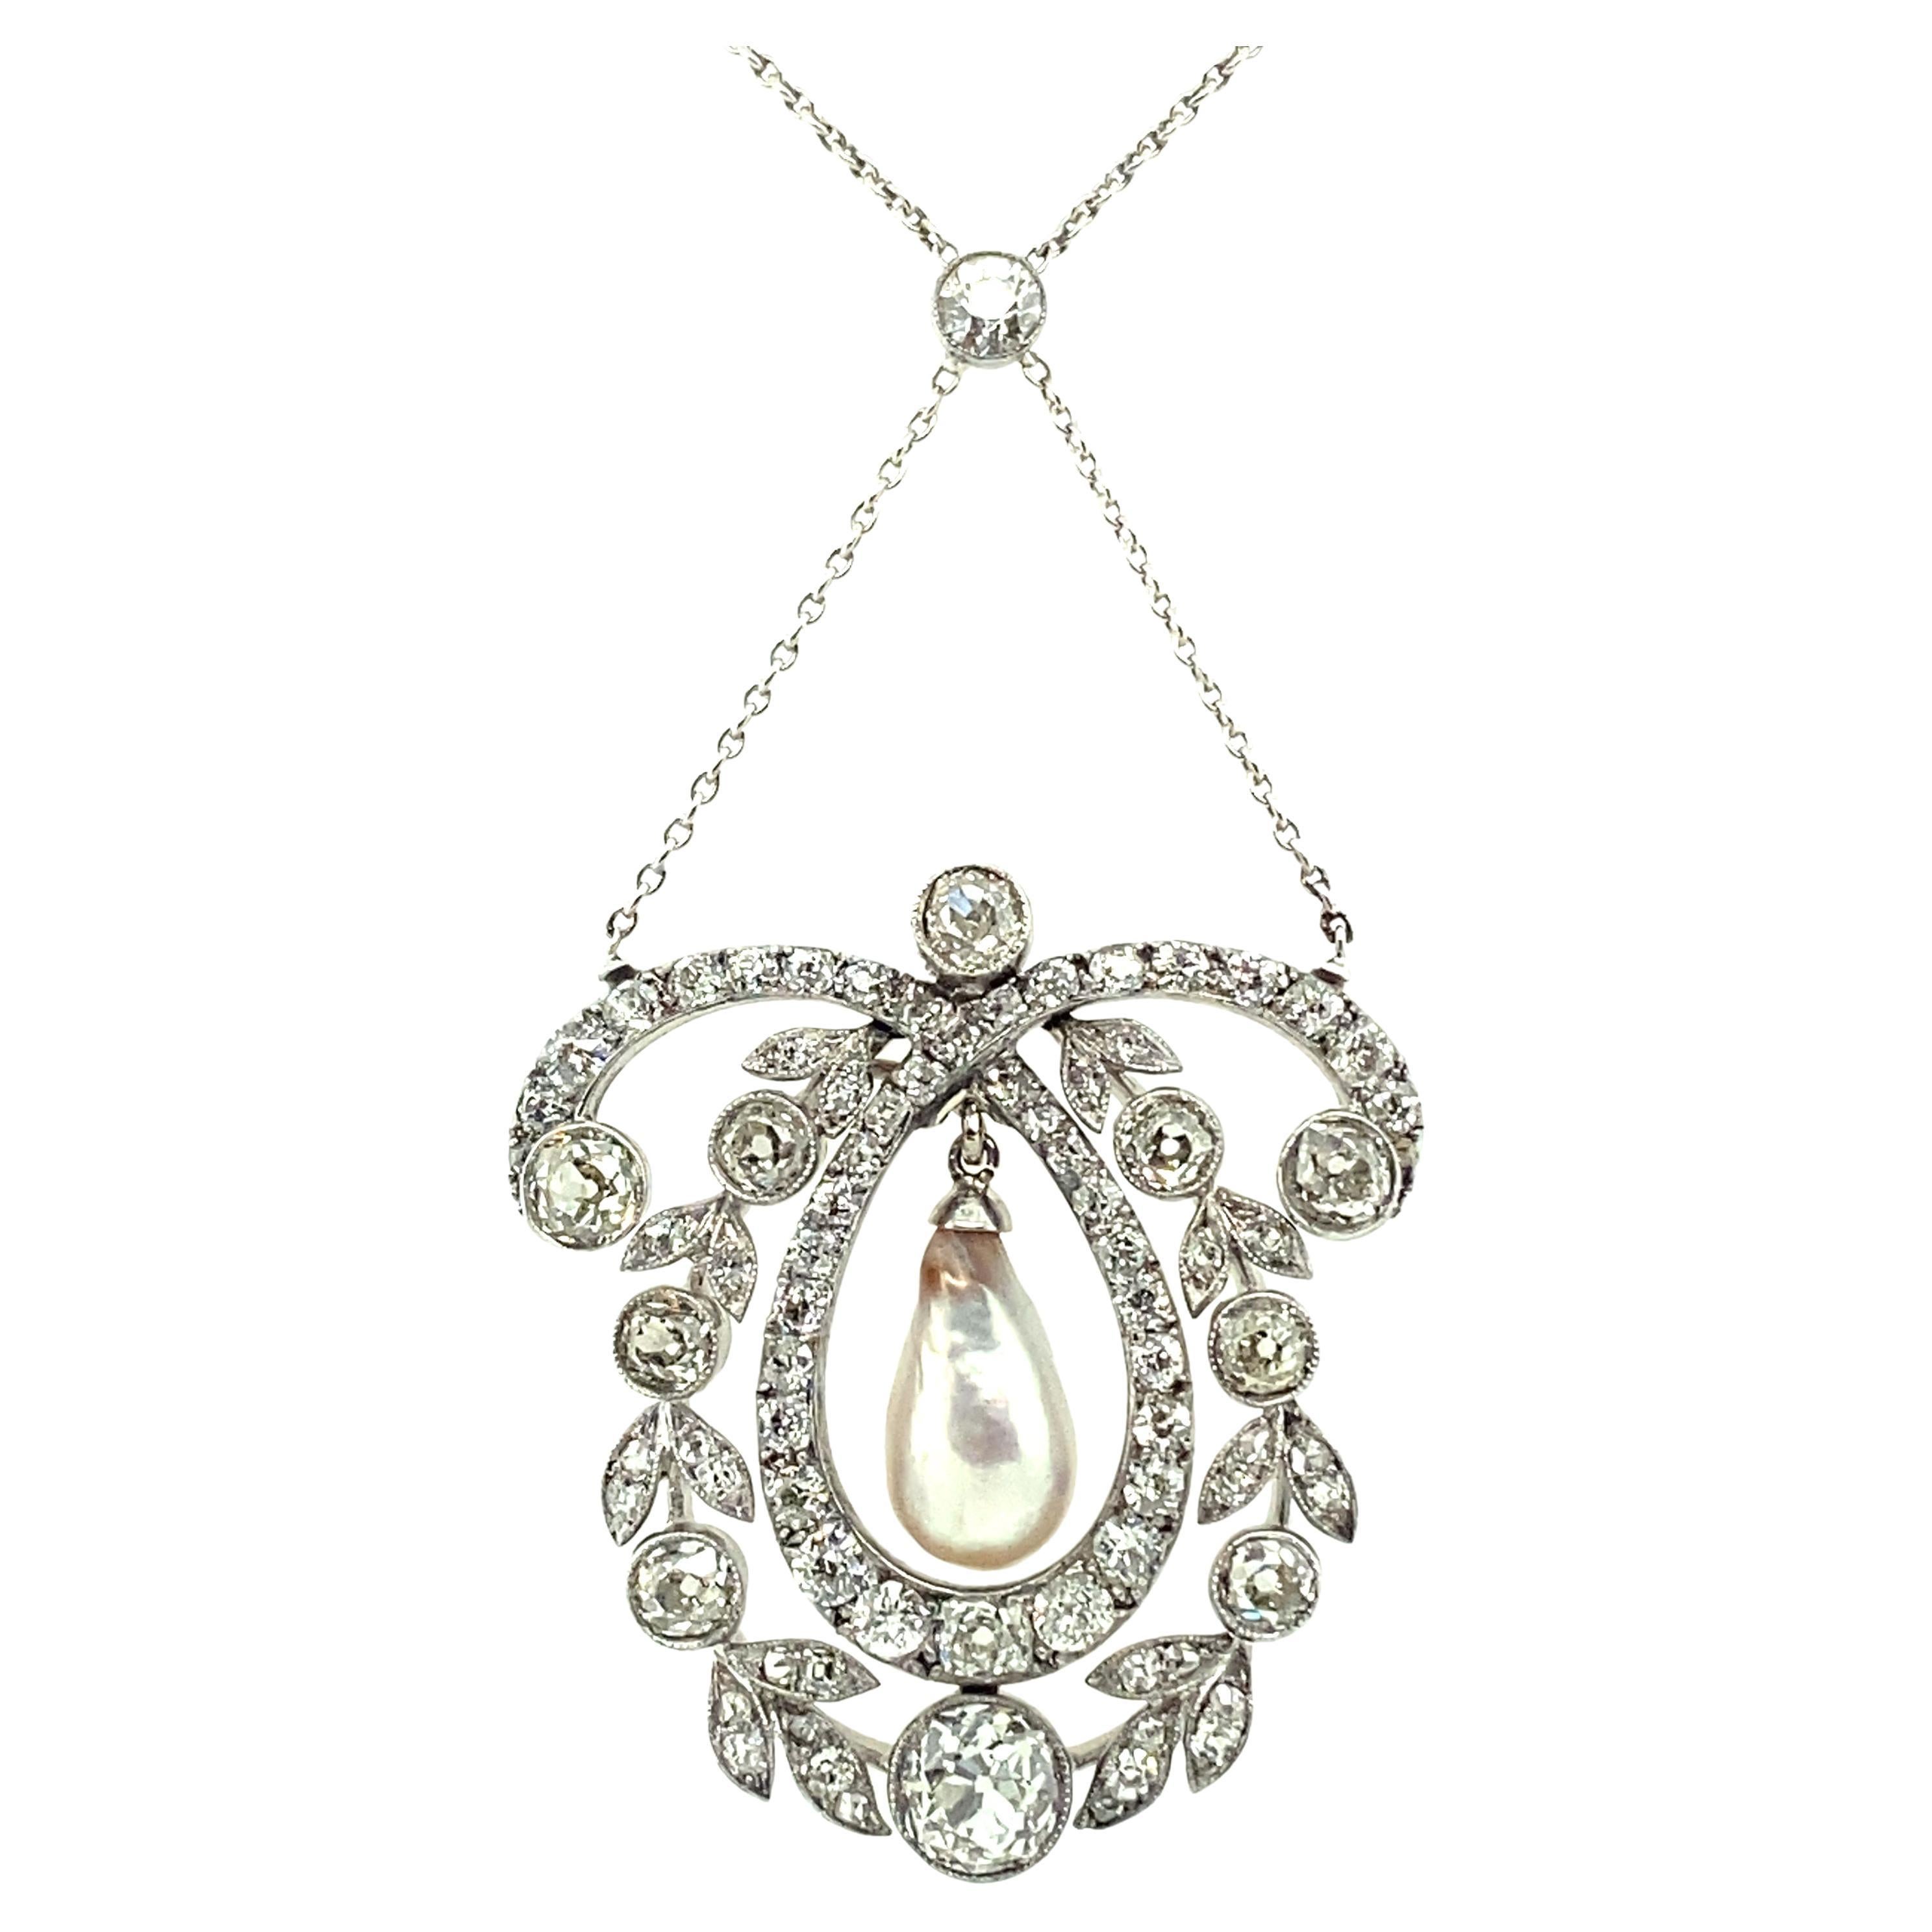 Unique Edwardian Natural Pearl and Diamond Necklace in Platinum 950